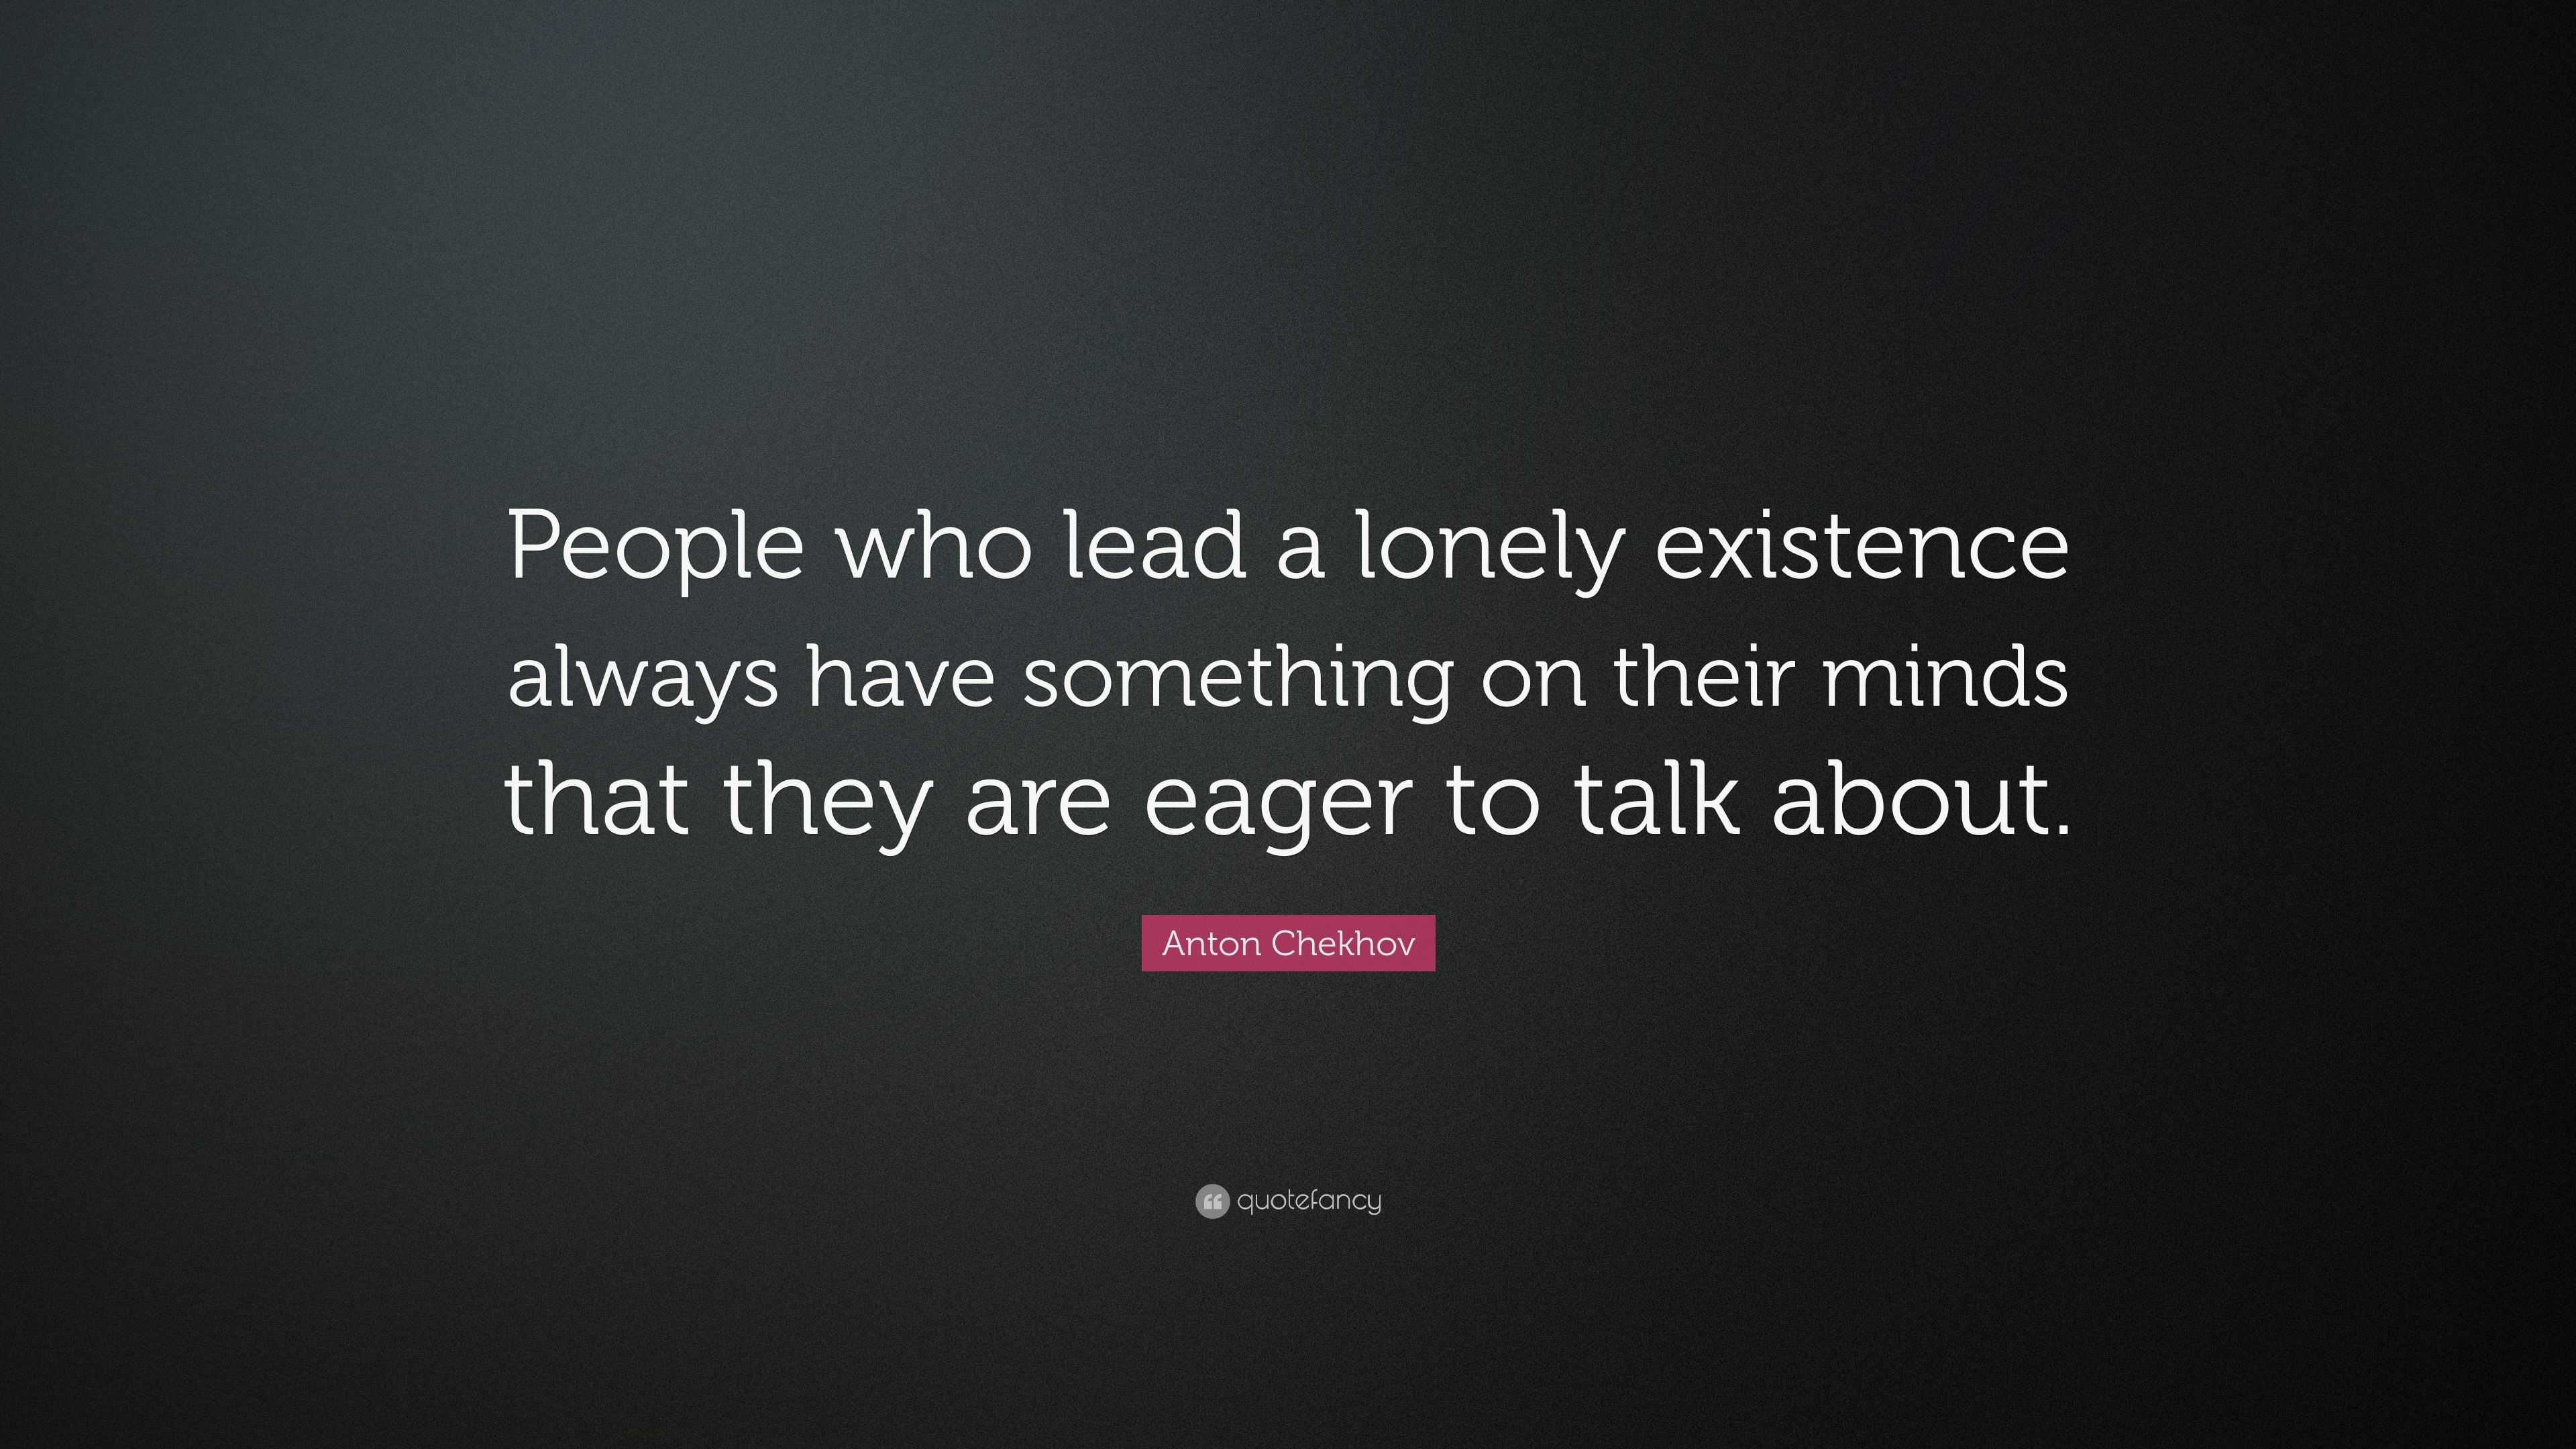 Anton Chekhov Quote: “People who lead a lonely existence always have ...